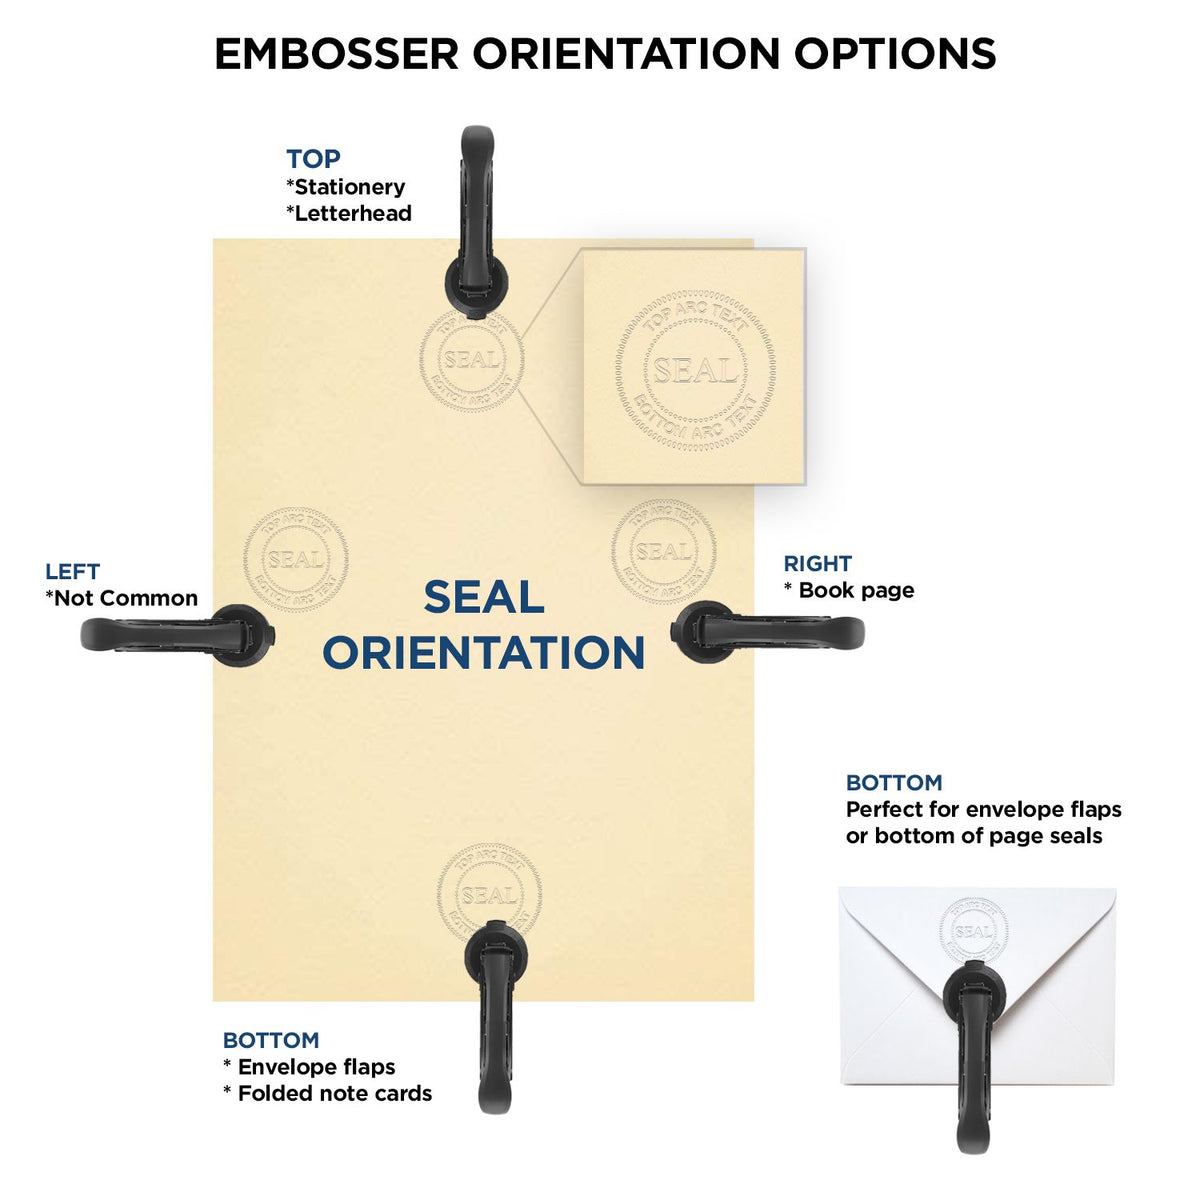 An infographic for the State of Louisiana Extended Long Reach Geologist Seal showing embosser orientation, this is showing examples of a top, bottom, right and left insert.